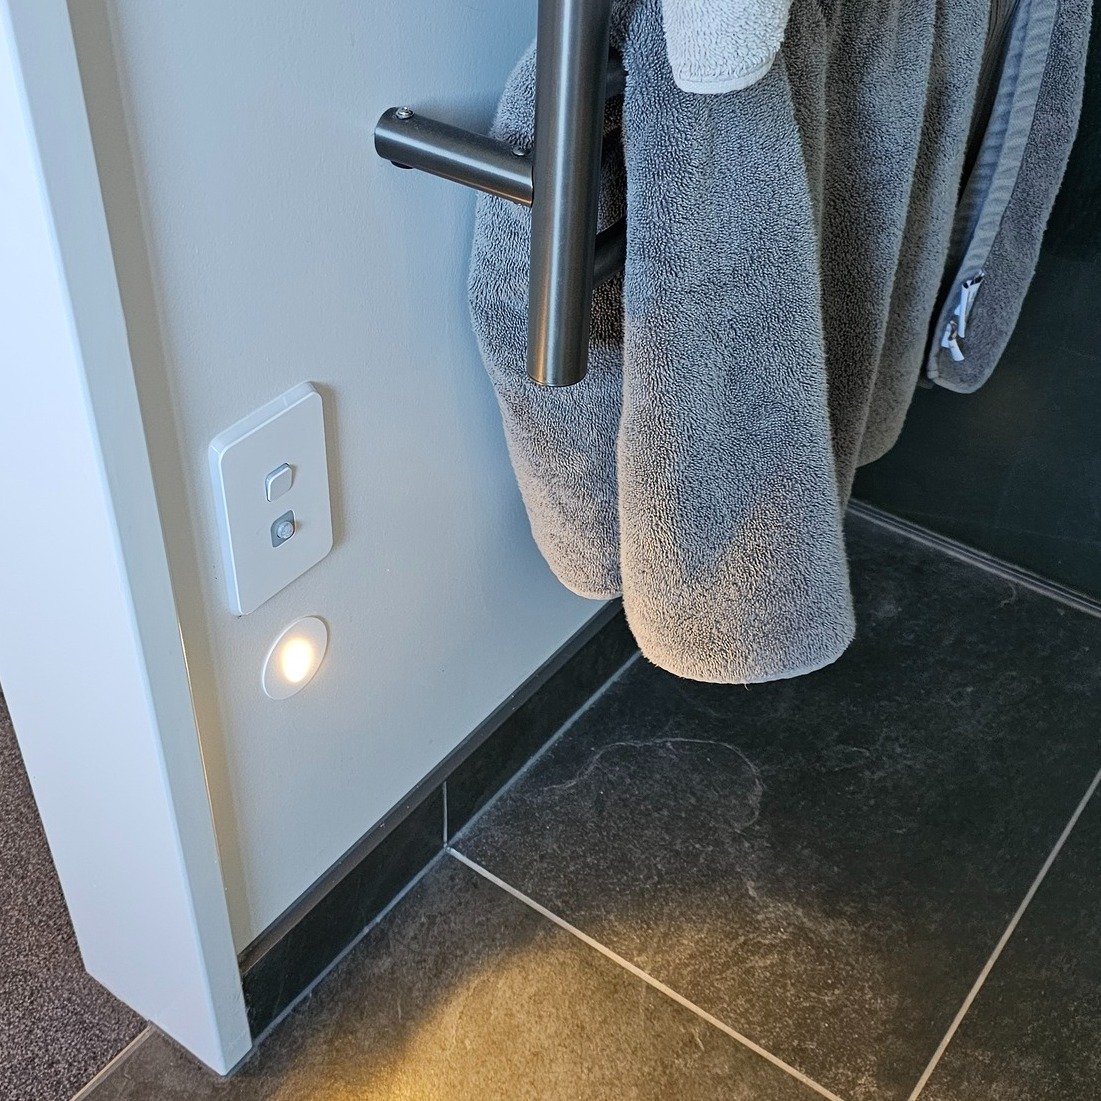 No more blinding lights in the middle of the night! 💡
We installed this tread light, controlled by a sensor in the switch plate above, meaning the light will automatically come on giving just enough light to use the toilet without being blinding. Ho